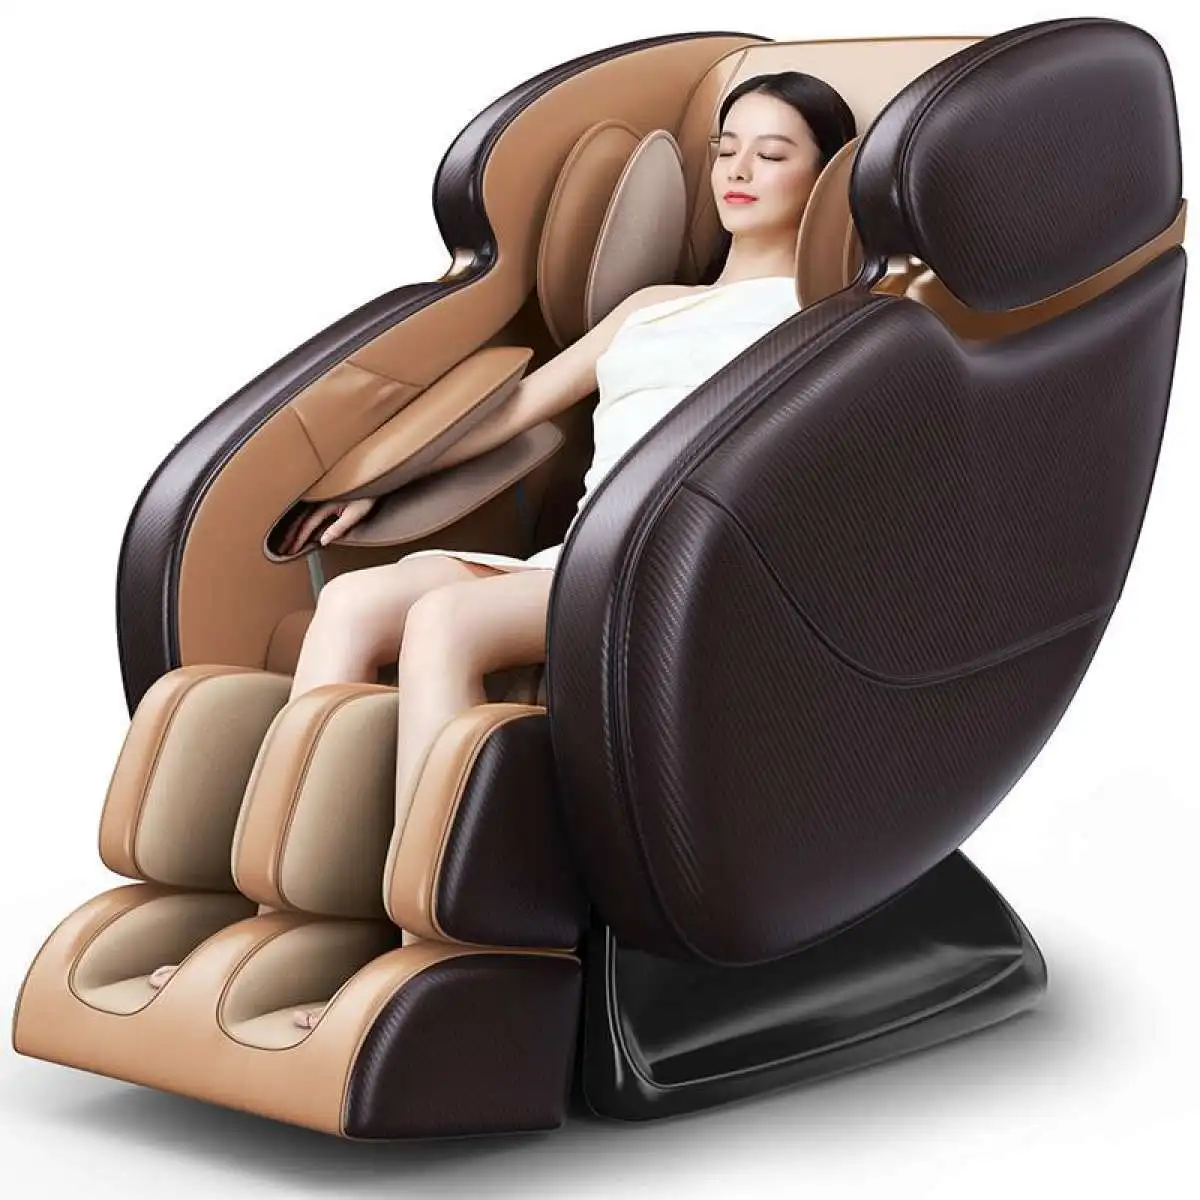 Full Body Sex Human Touch India Inflatable Kids Hypnotherapy Pedicure Game Chair Genuine Leather Luxury 4 D Massage Chair Buy Inflatable Kids Hypnotherapy Pedicure Game Chair Genuine Leather Luxury 4 D